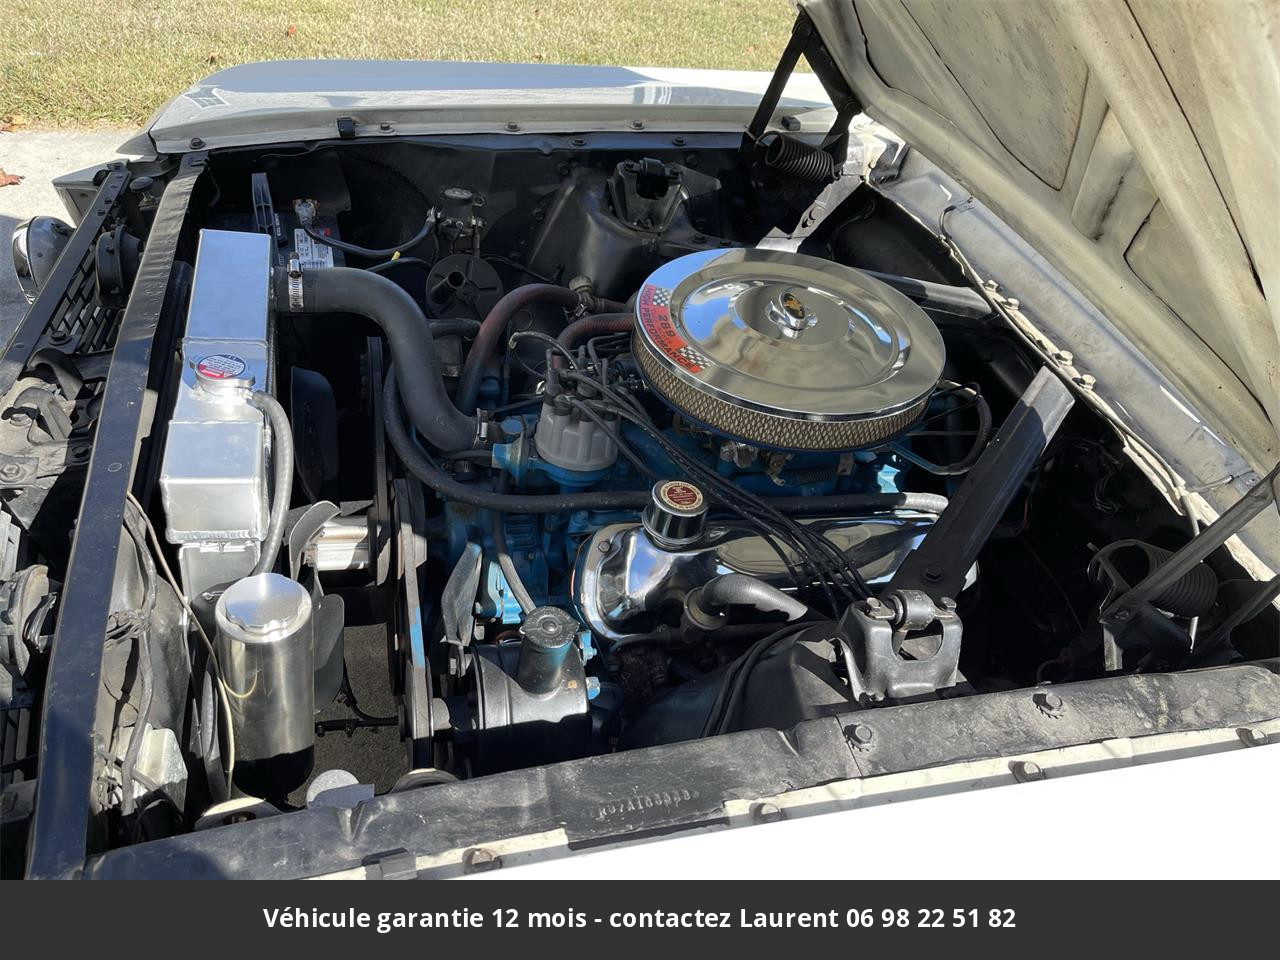 Ford Mustang  Gt a v8 1966 prix tout compris